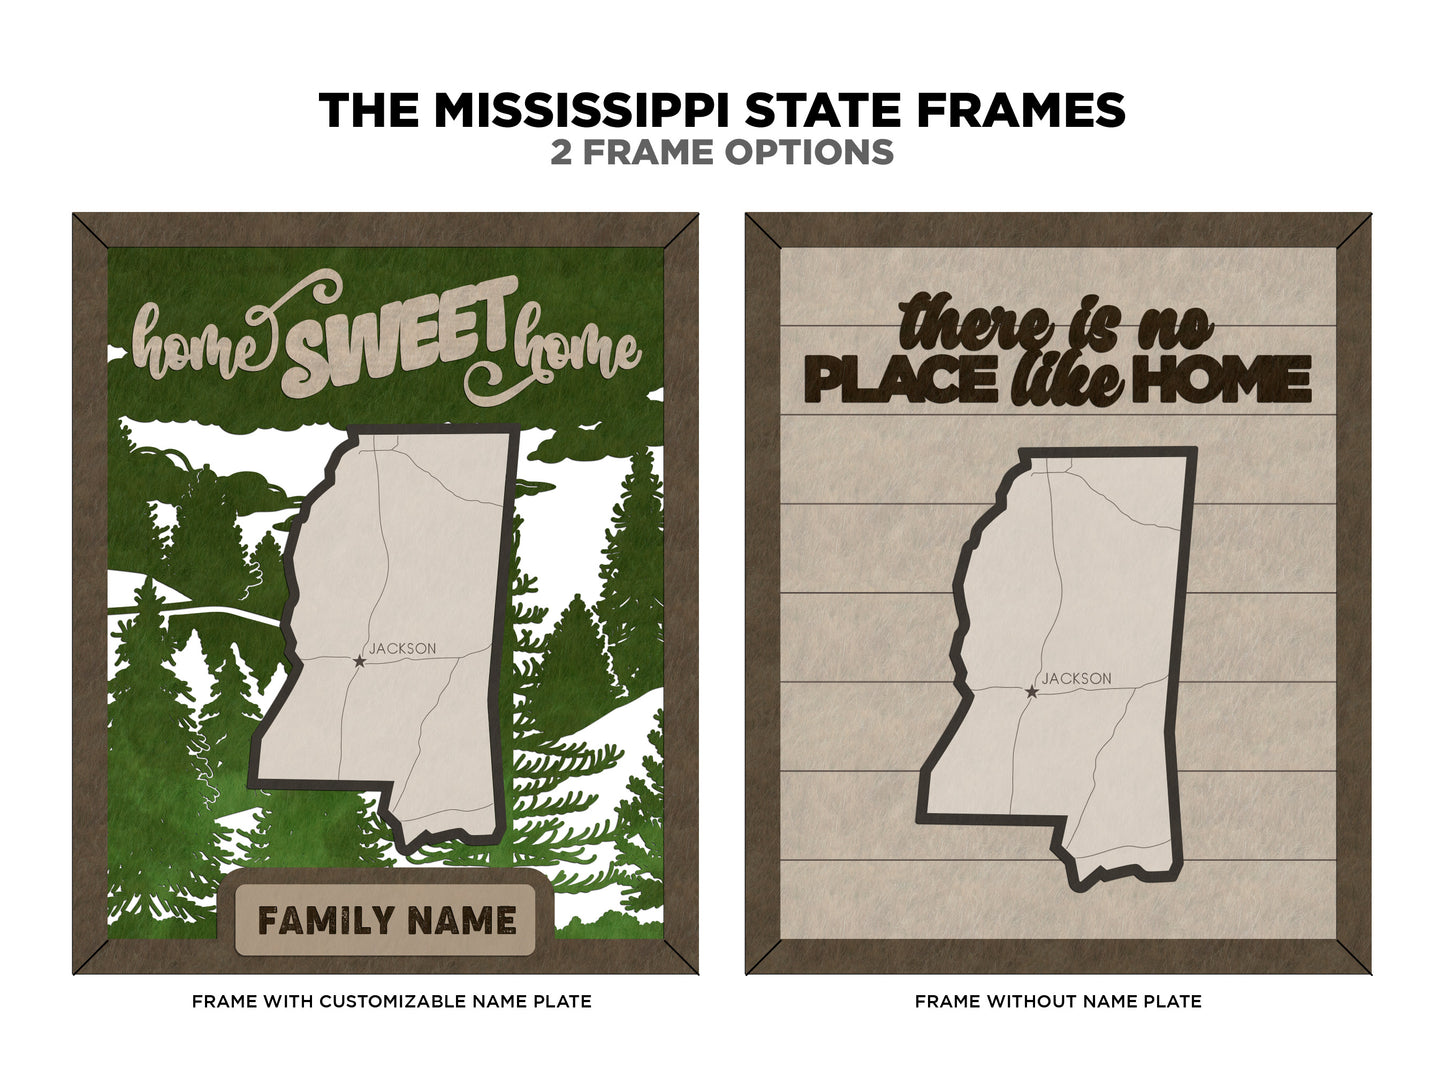 The Mississippi State Frame - 13 text options, 12 backgrounds, 25 icons Included - Make over 7,500 designs - Glowforge & Lightburn Tested